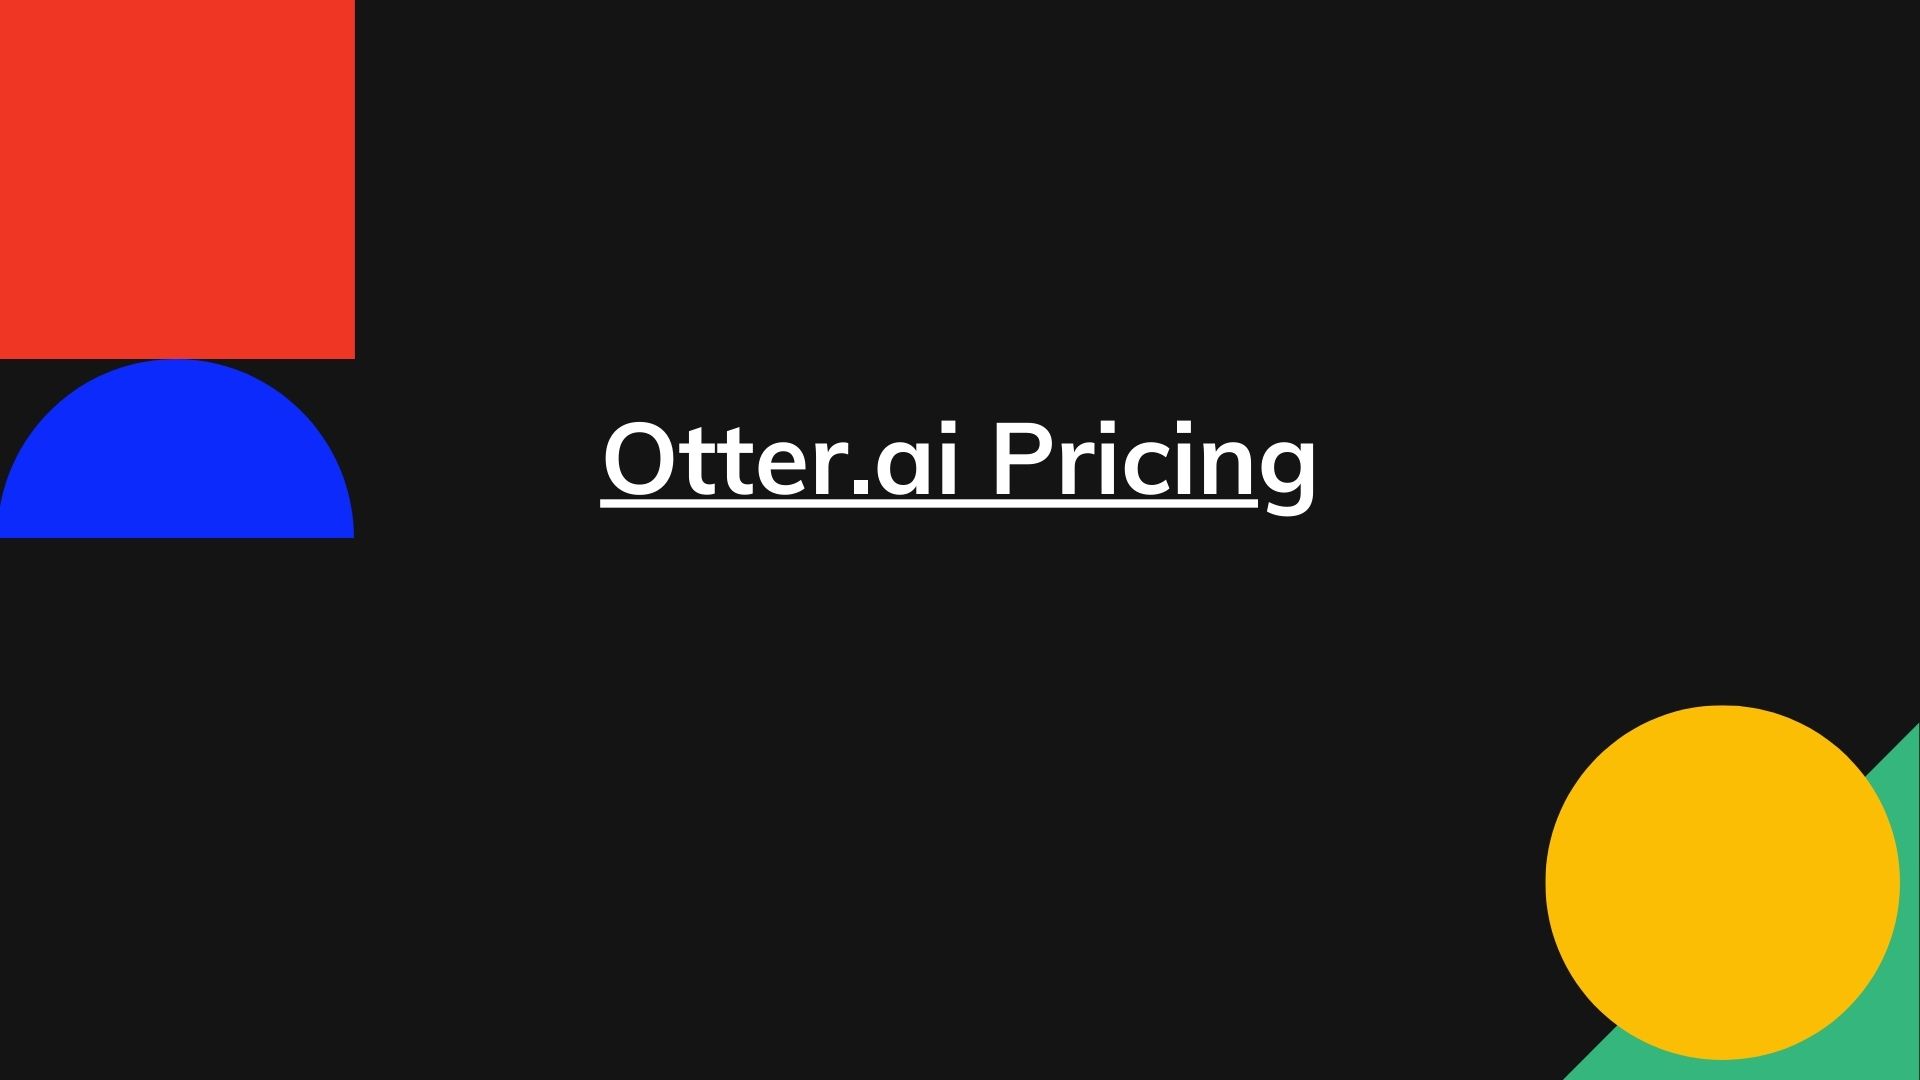 Otter.ai Pricing – Actual Prices for All Plans